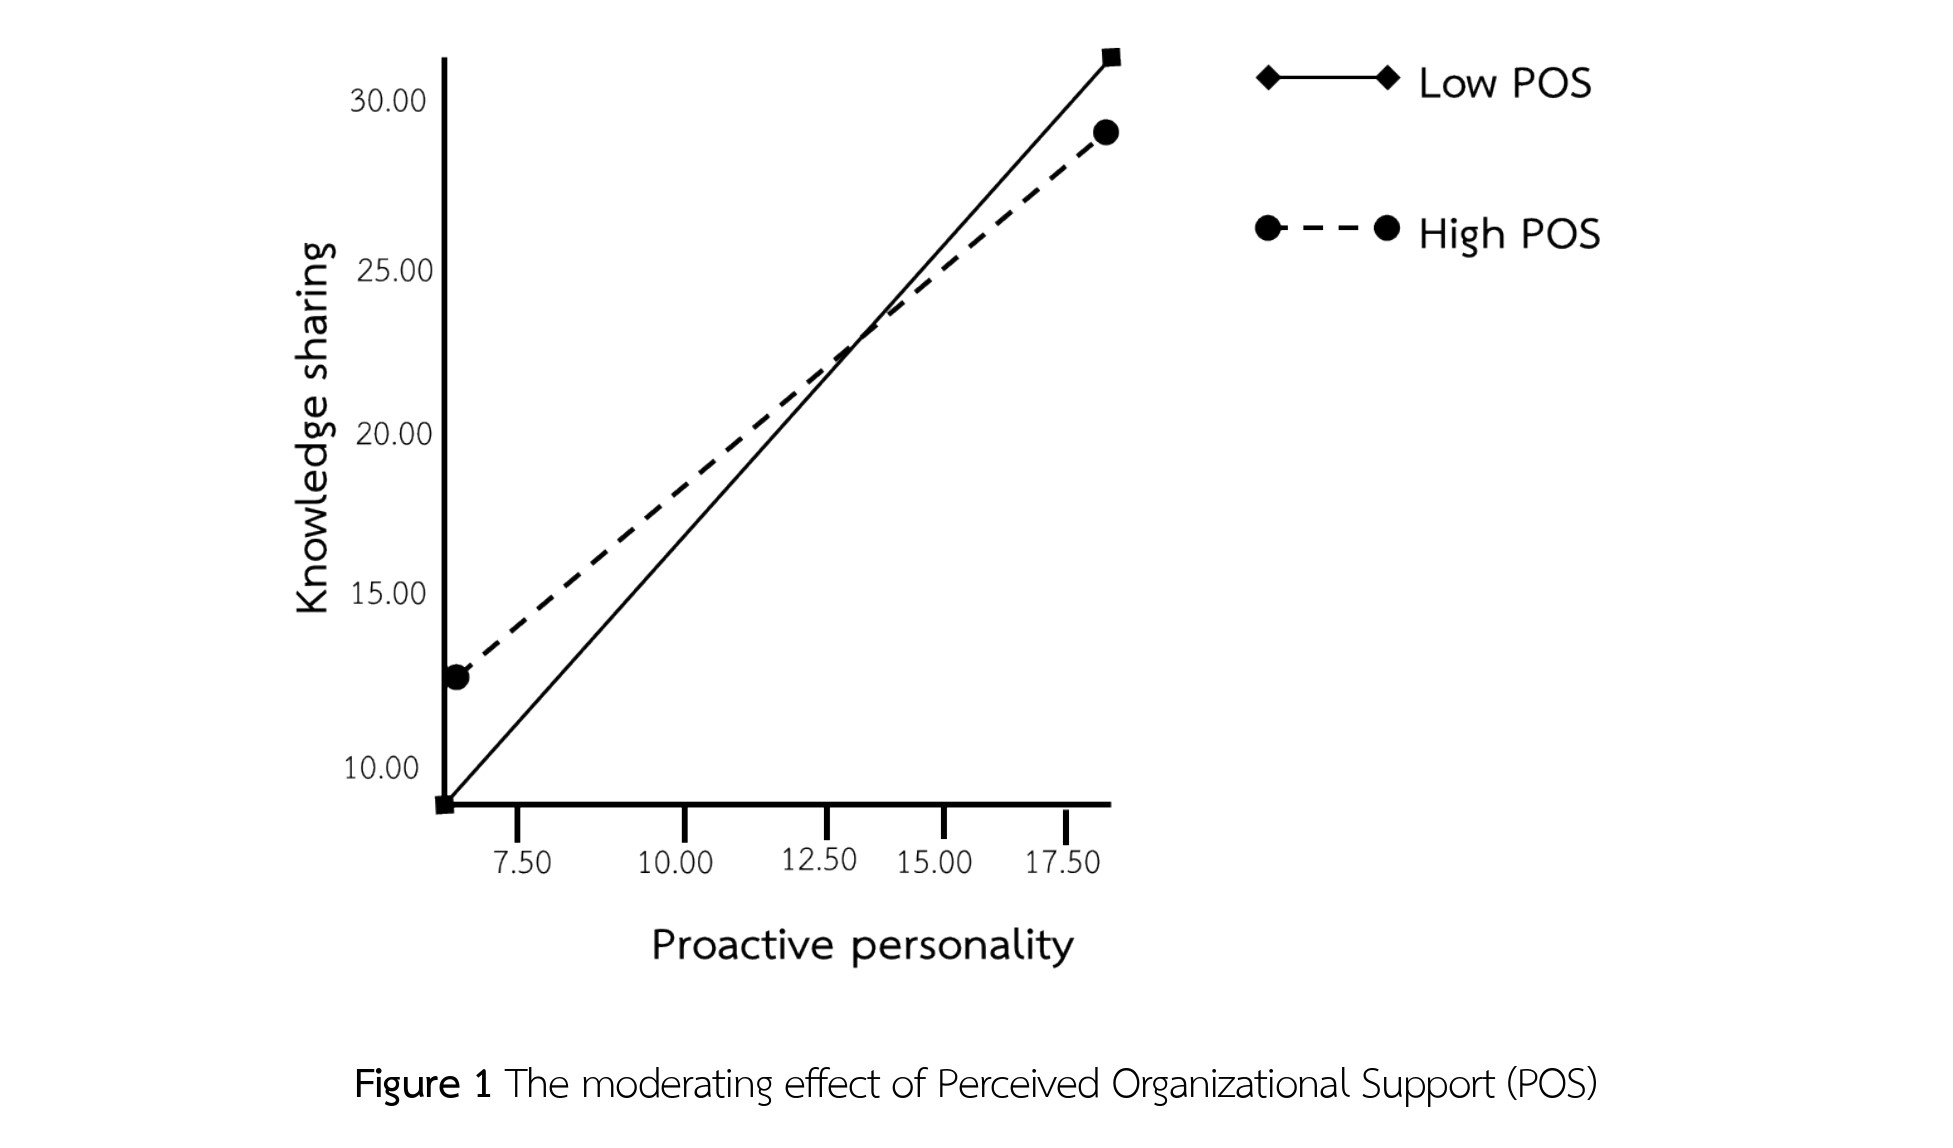 Figure 1 The moderating effect of Perceived Organizational Support (POS)